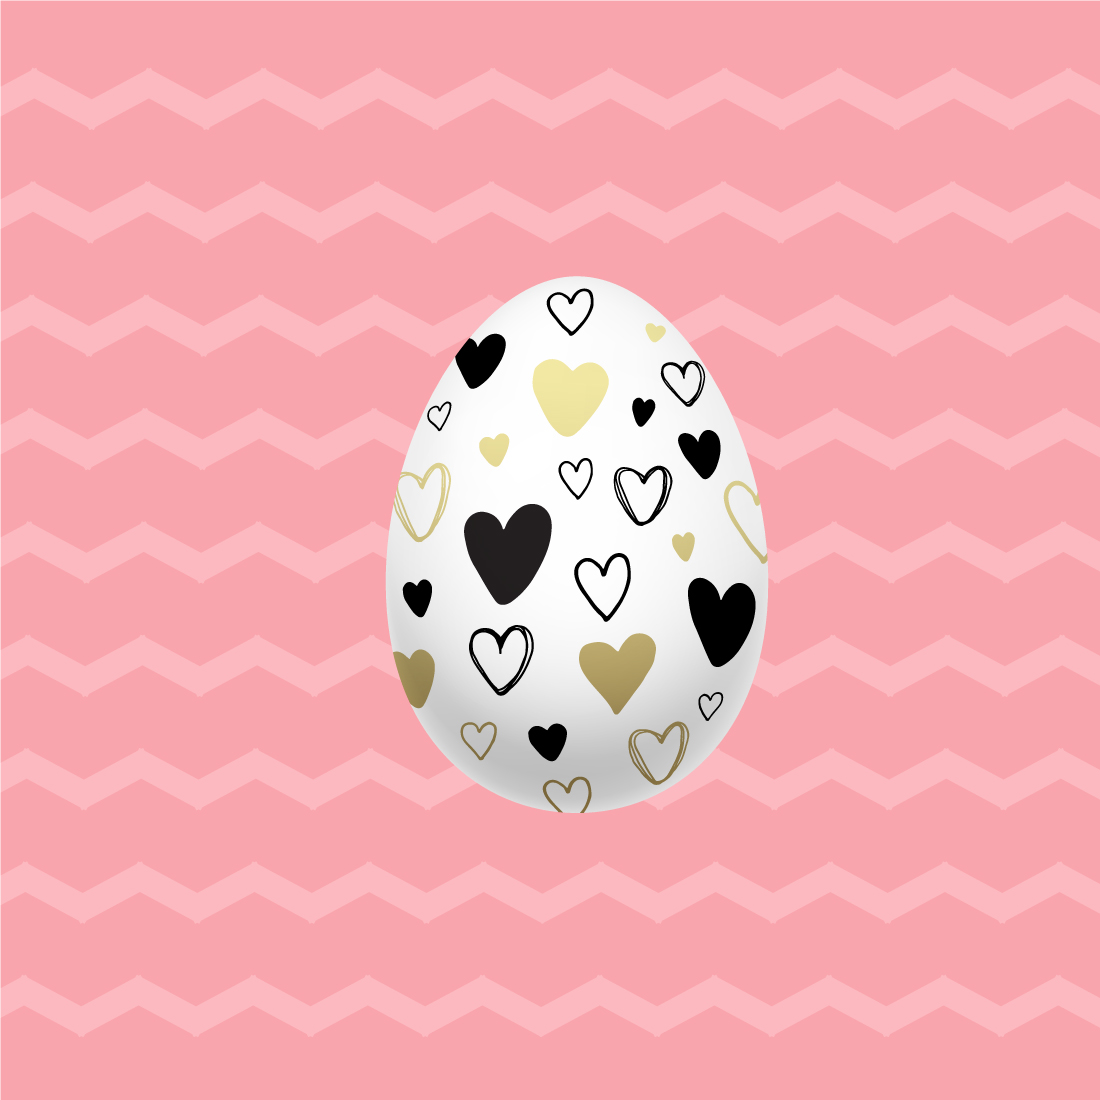 Egg with hearts on a pink background.